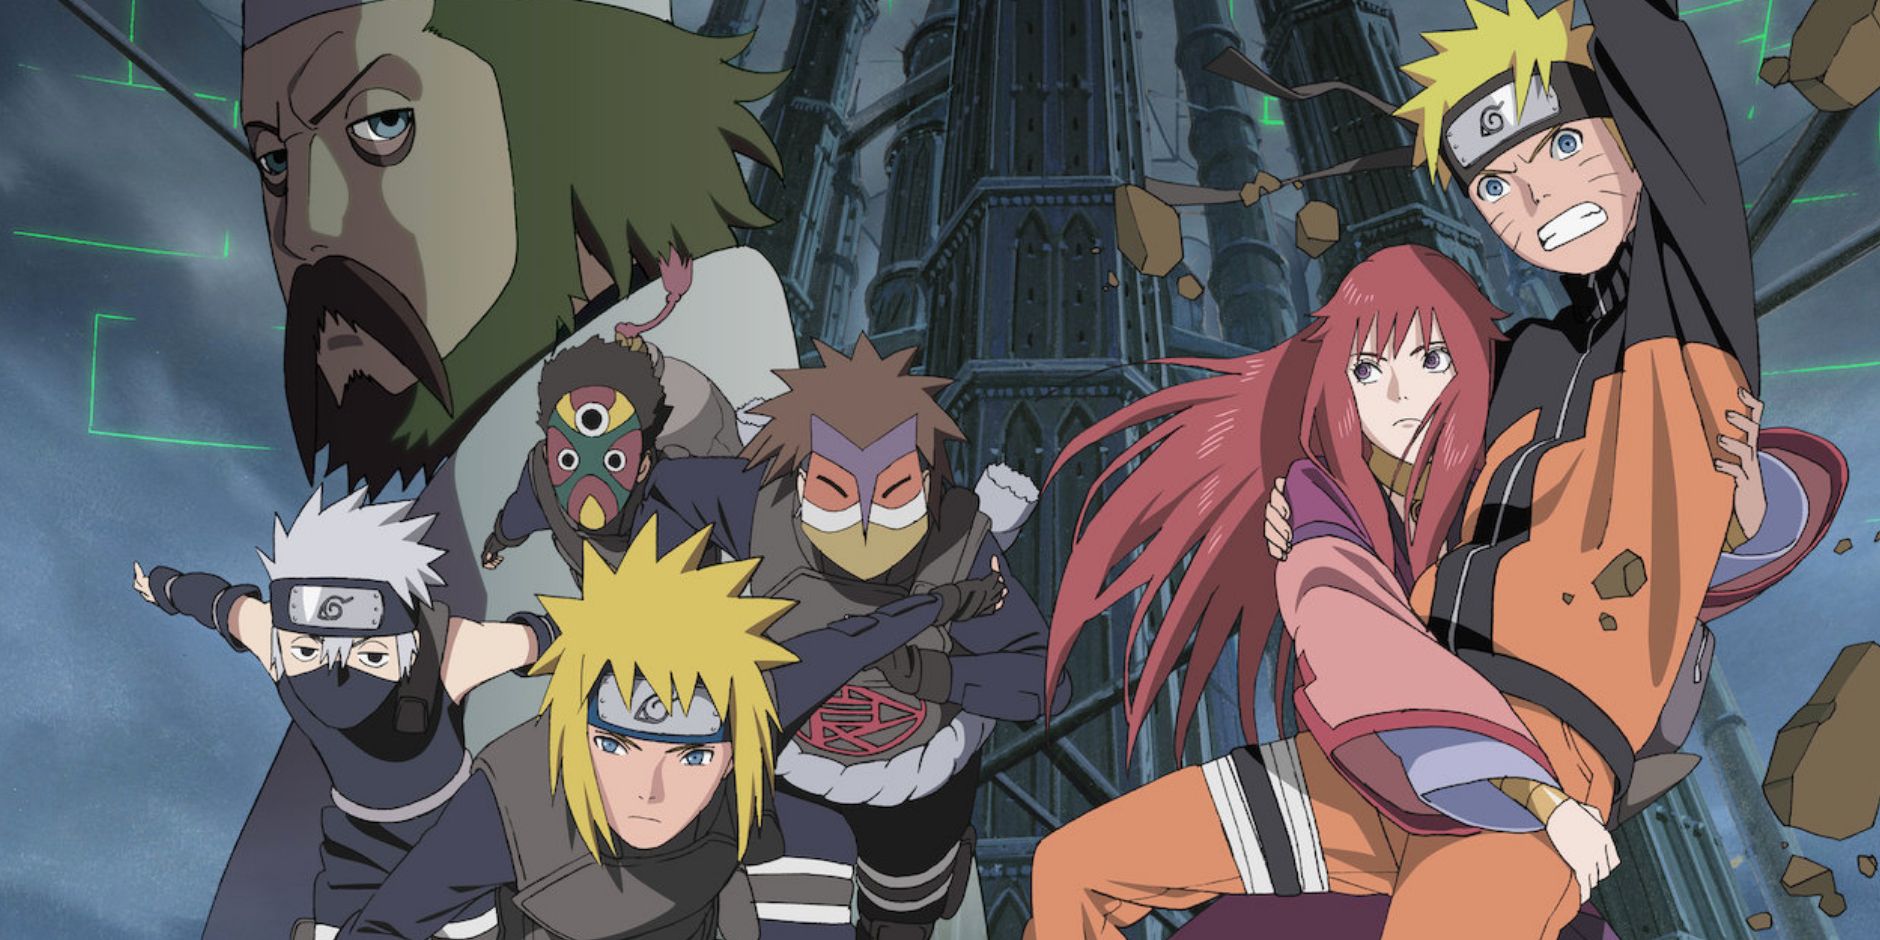 Cast of Naruto Shippuden: The Lost Tower featuring Naruto and Sara in the foreground with Kakashi and Minato with enemies in the back